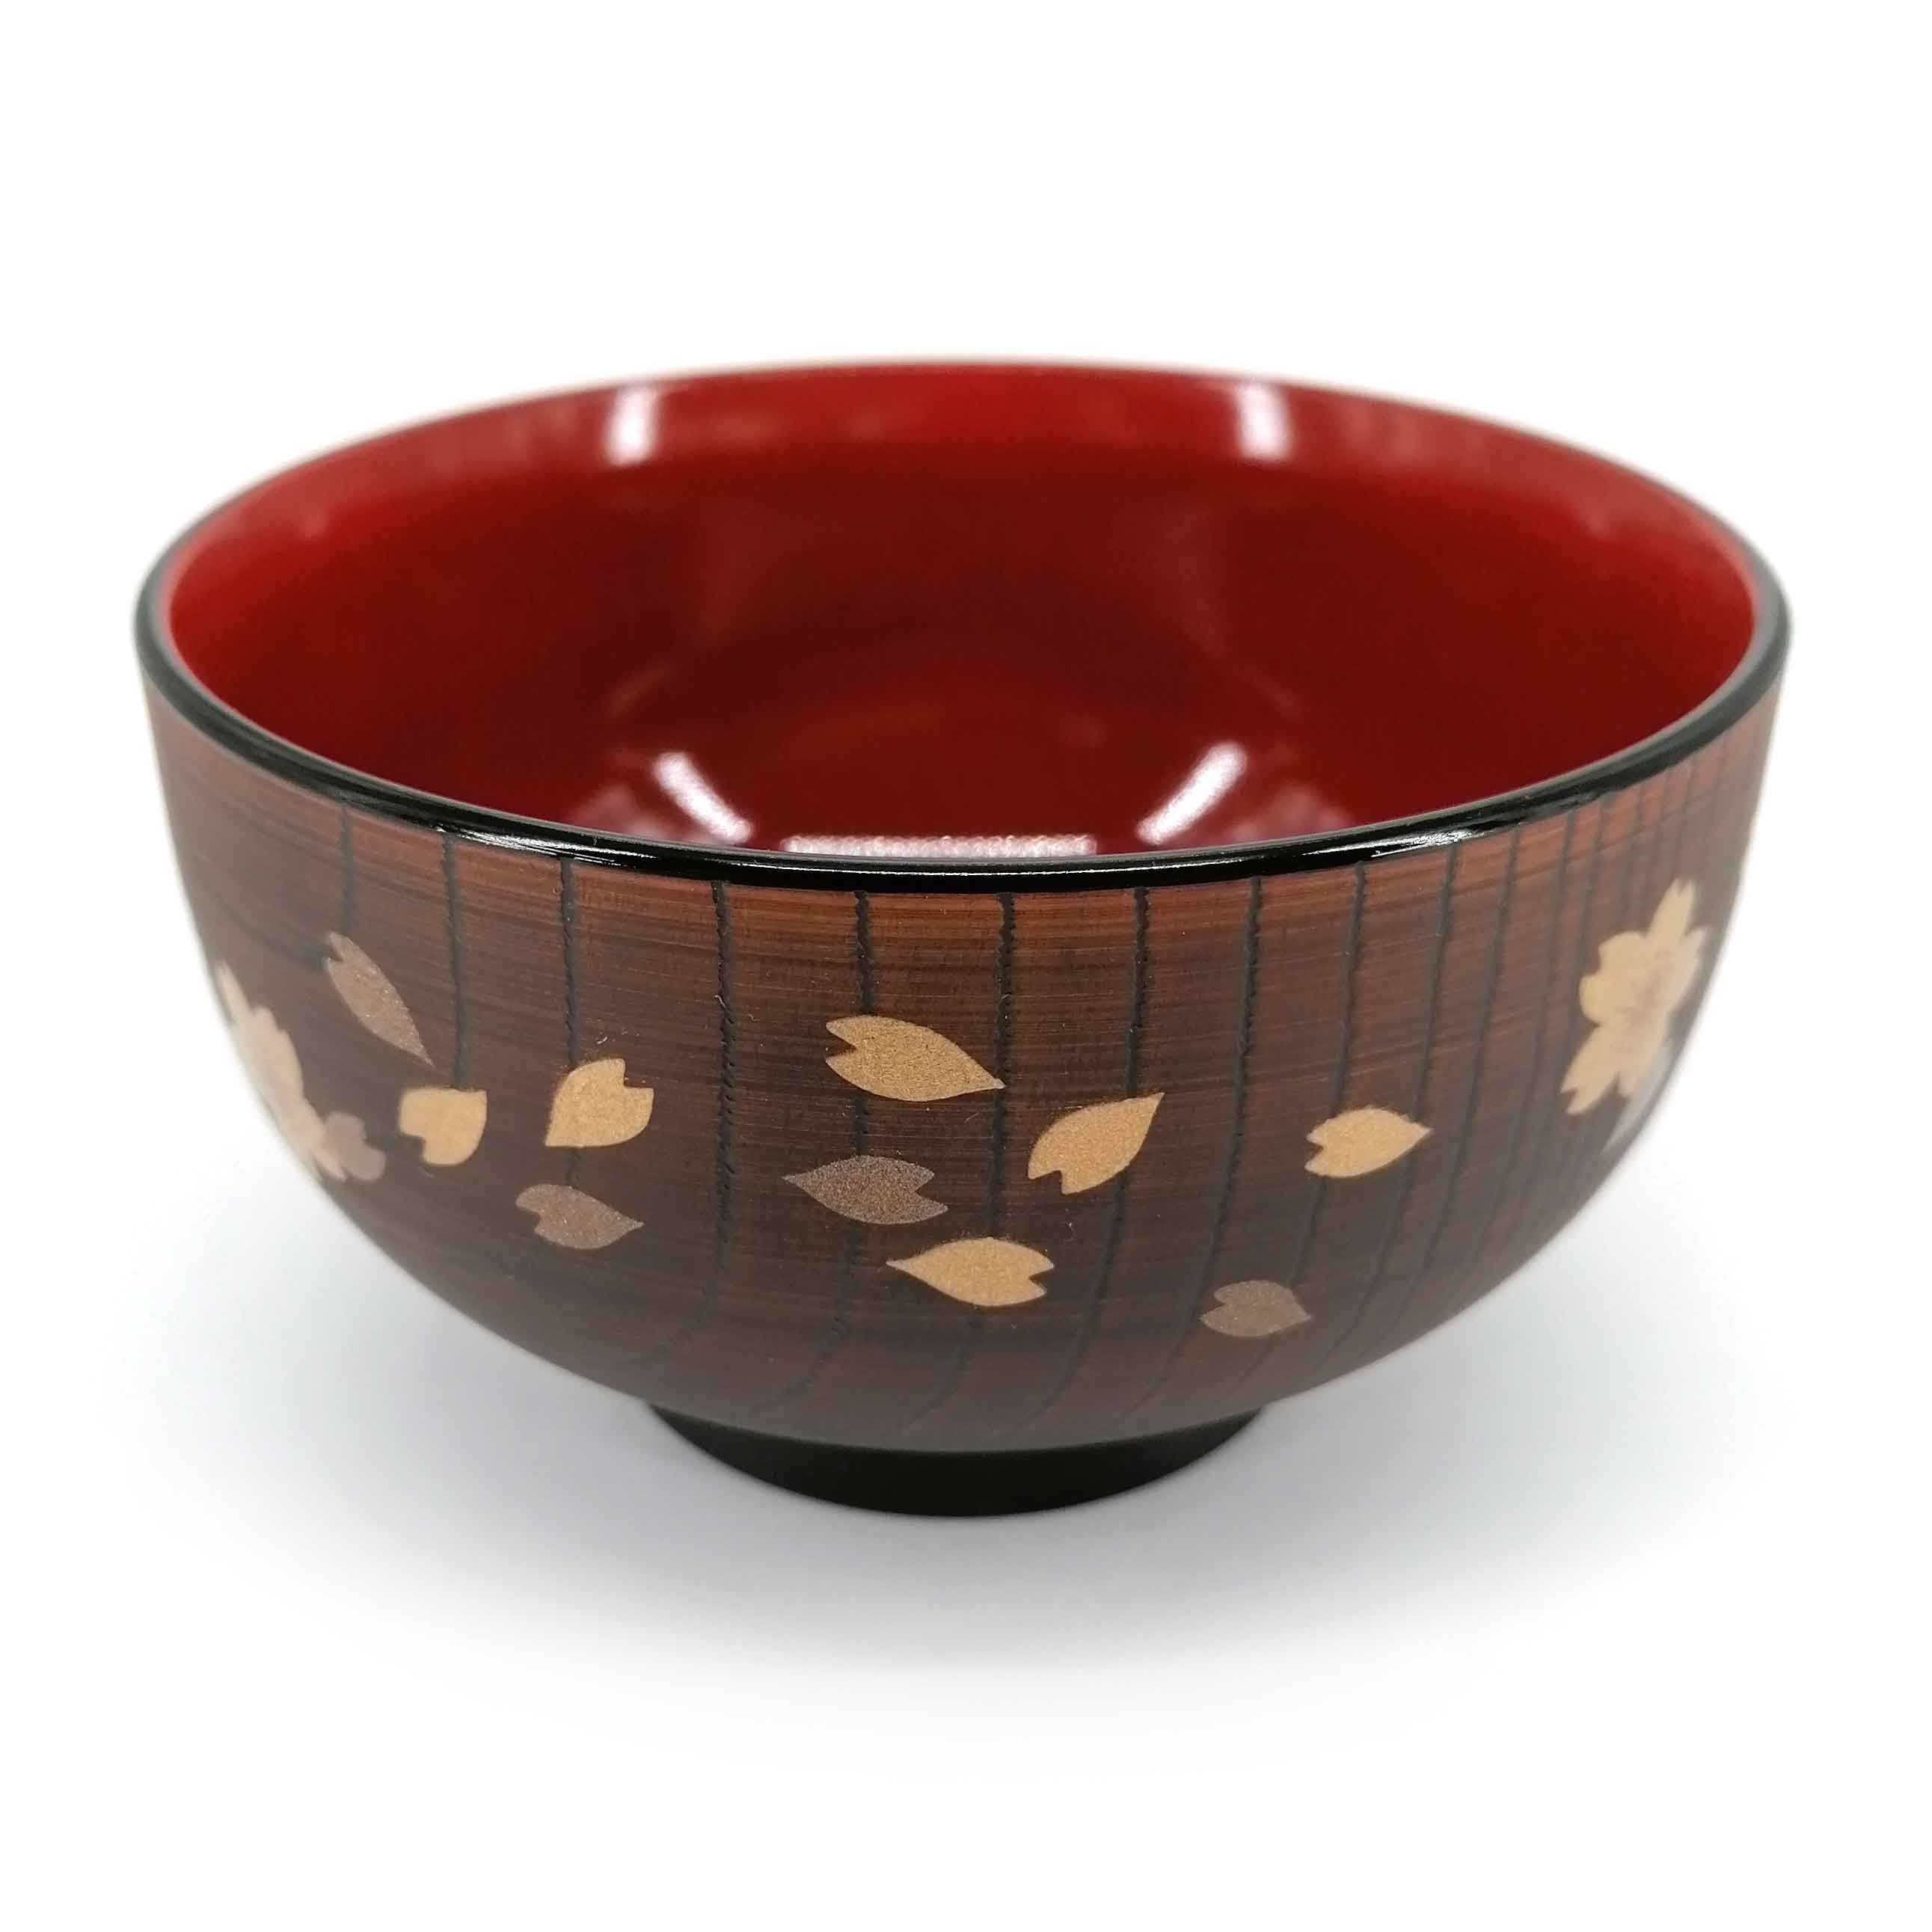 Made in Japan Imitation Wood Donburi Japanese Rice and Miso Soup Bowls Plastic Set of 4 